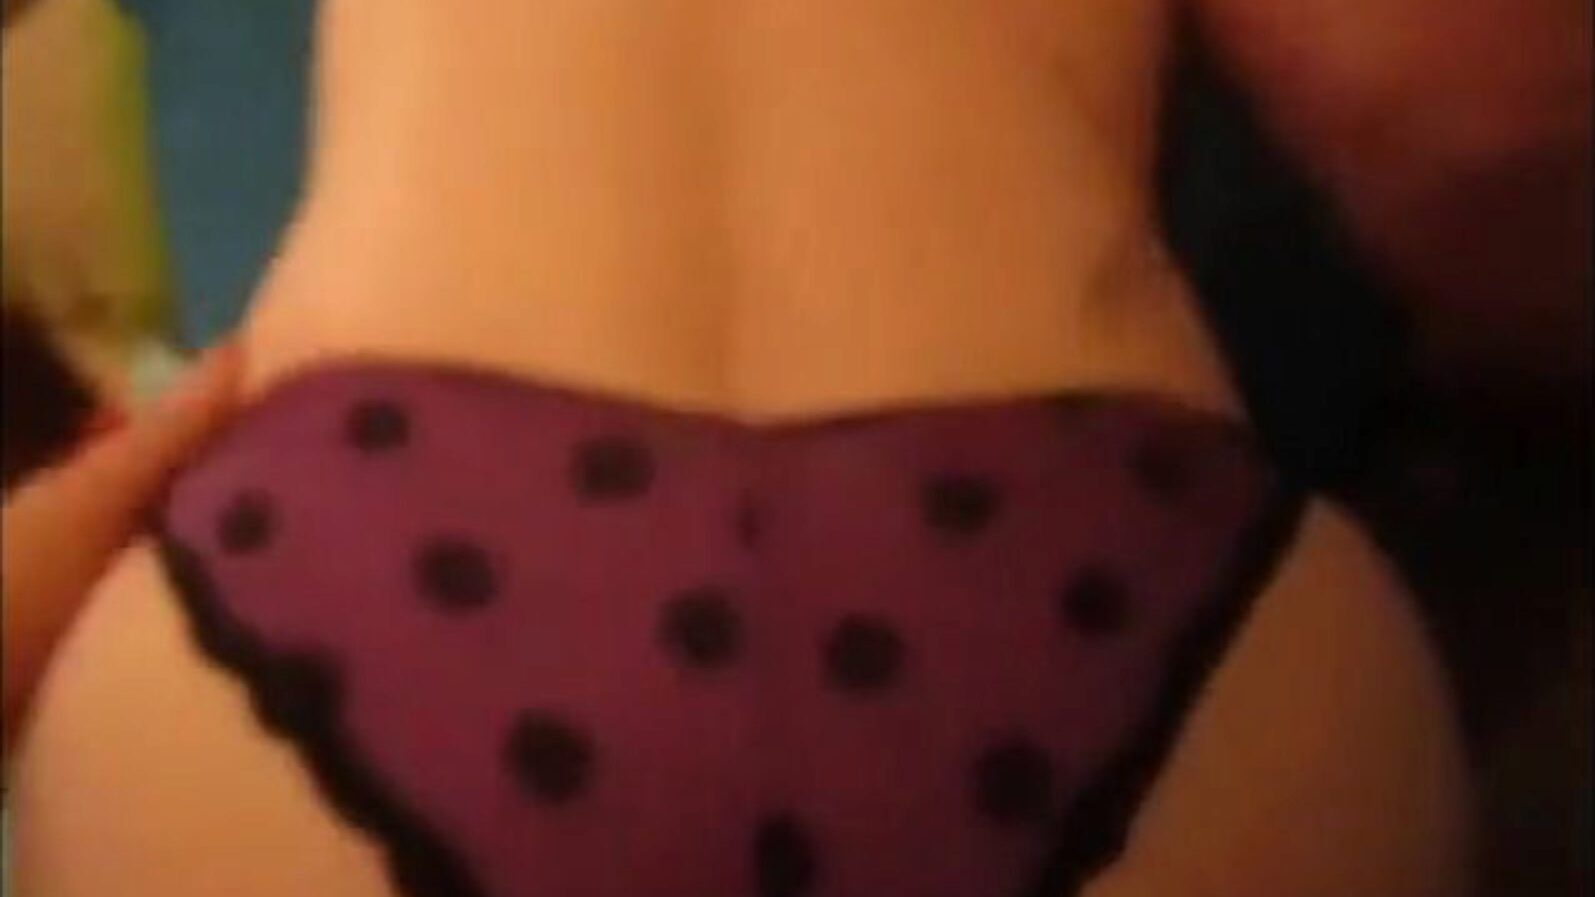 Fucking mother in law doggy stance in wife's panties